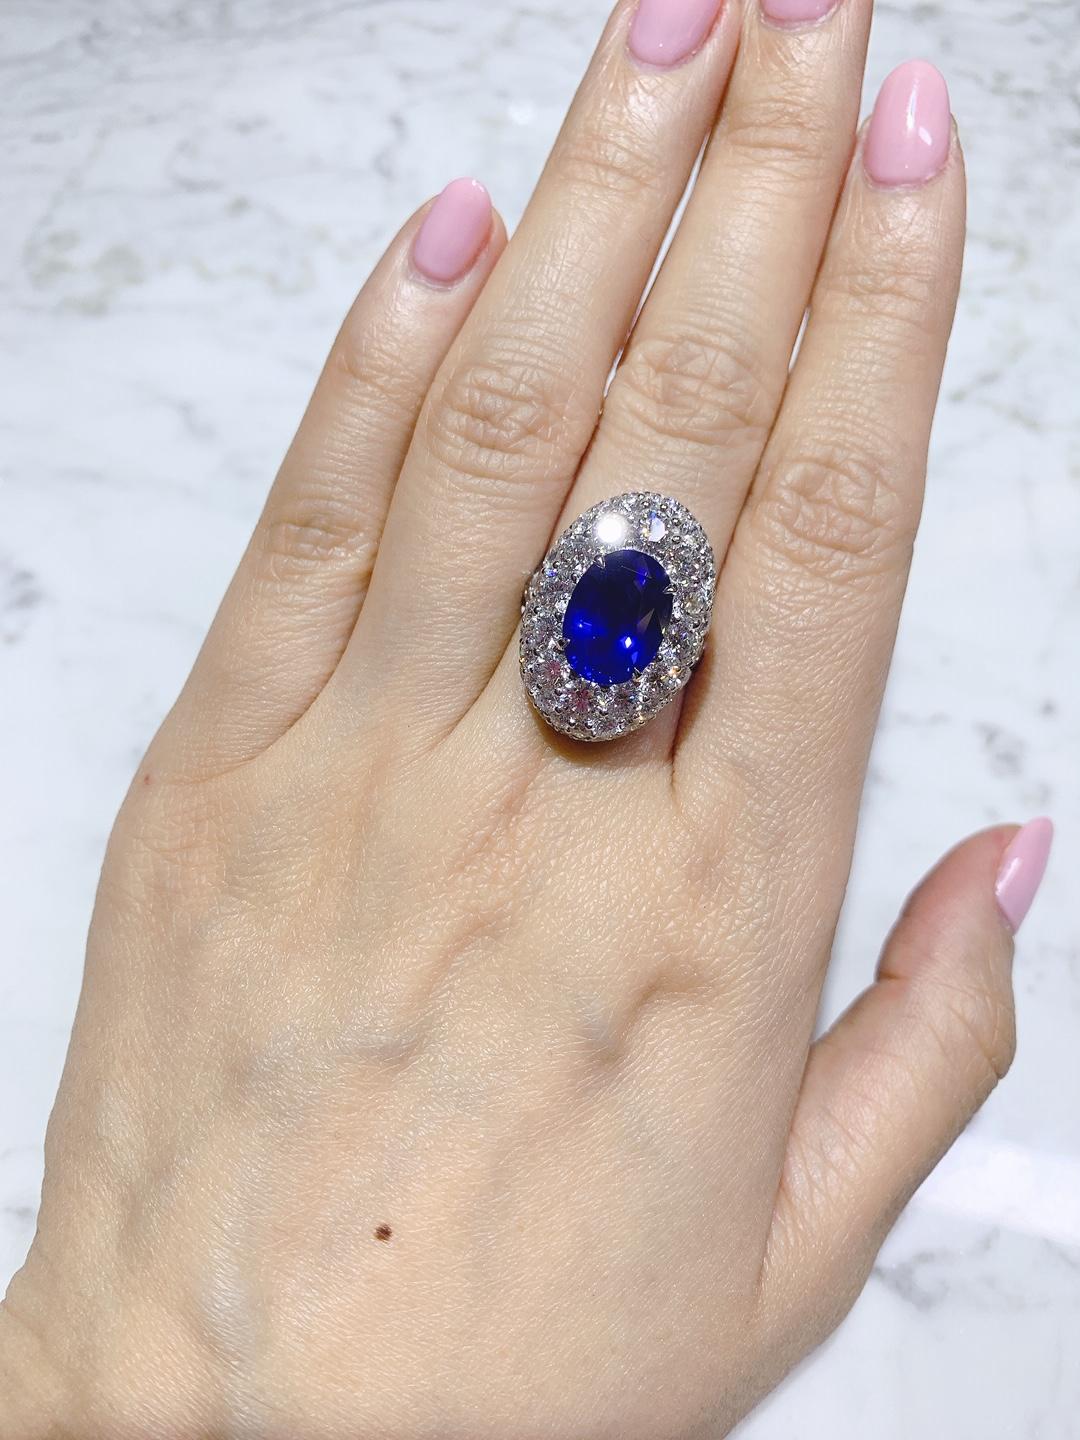 GRS Certified 6.24 Carat Ceylon Blue Sapphire Ring 'Heated' For Sale 3